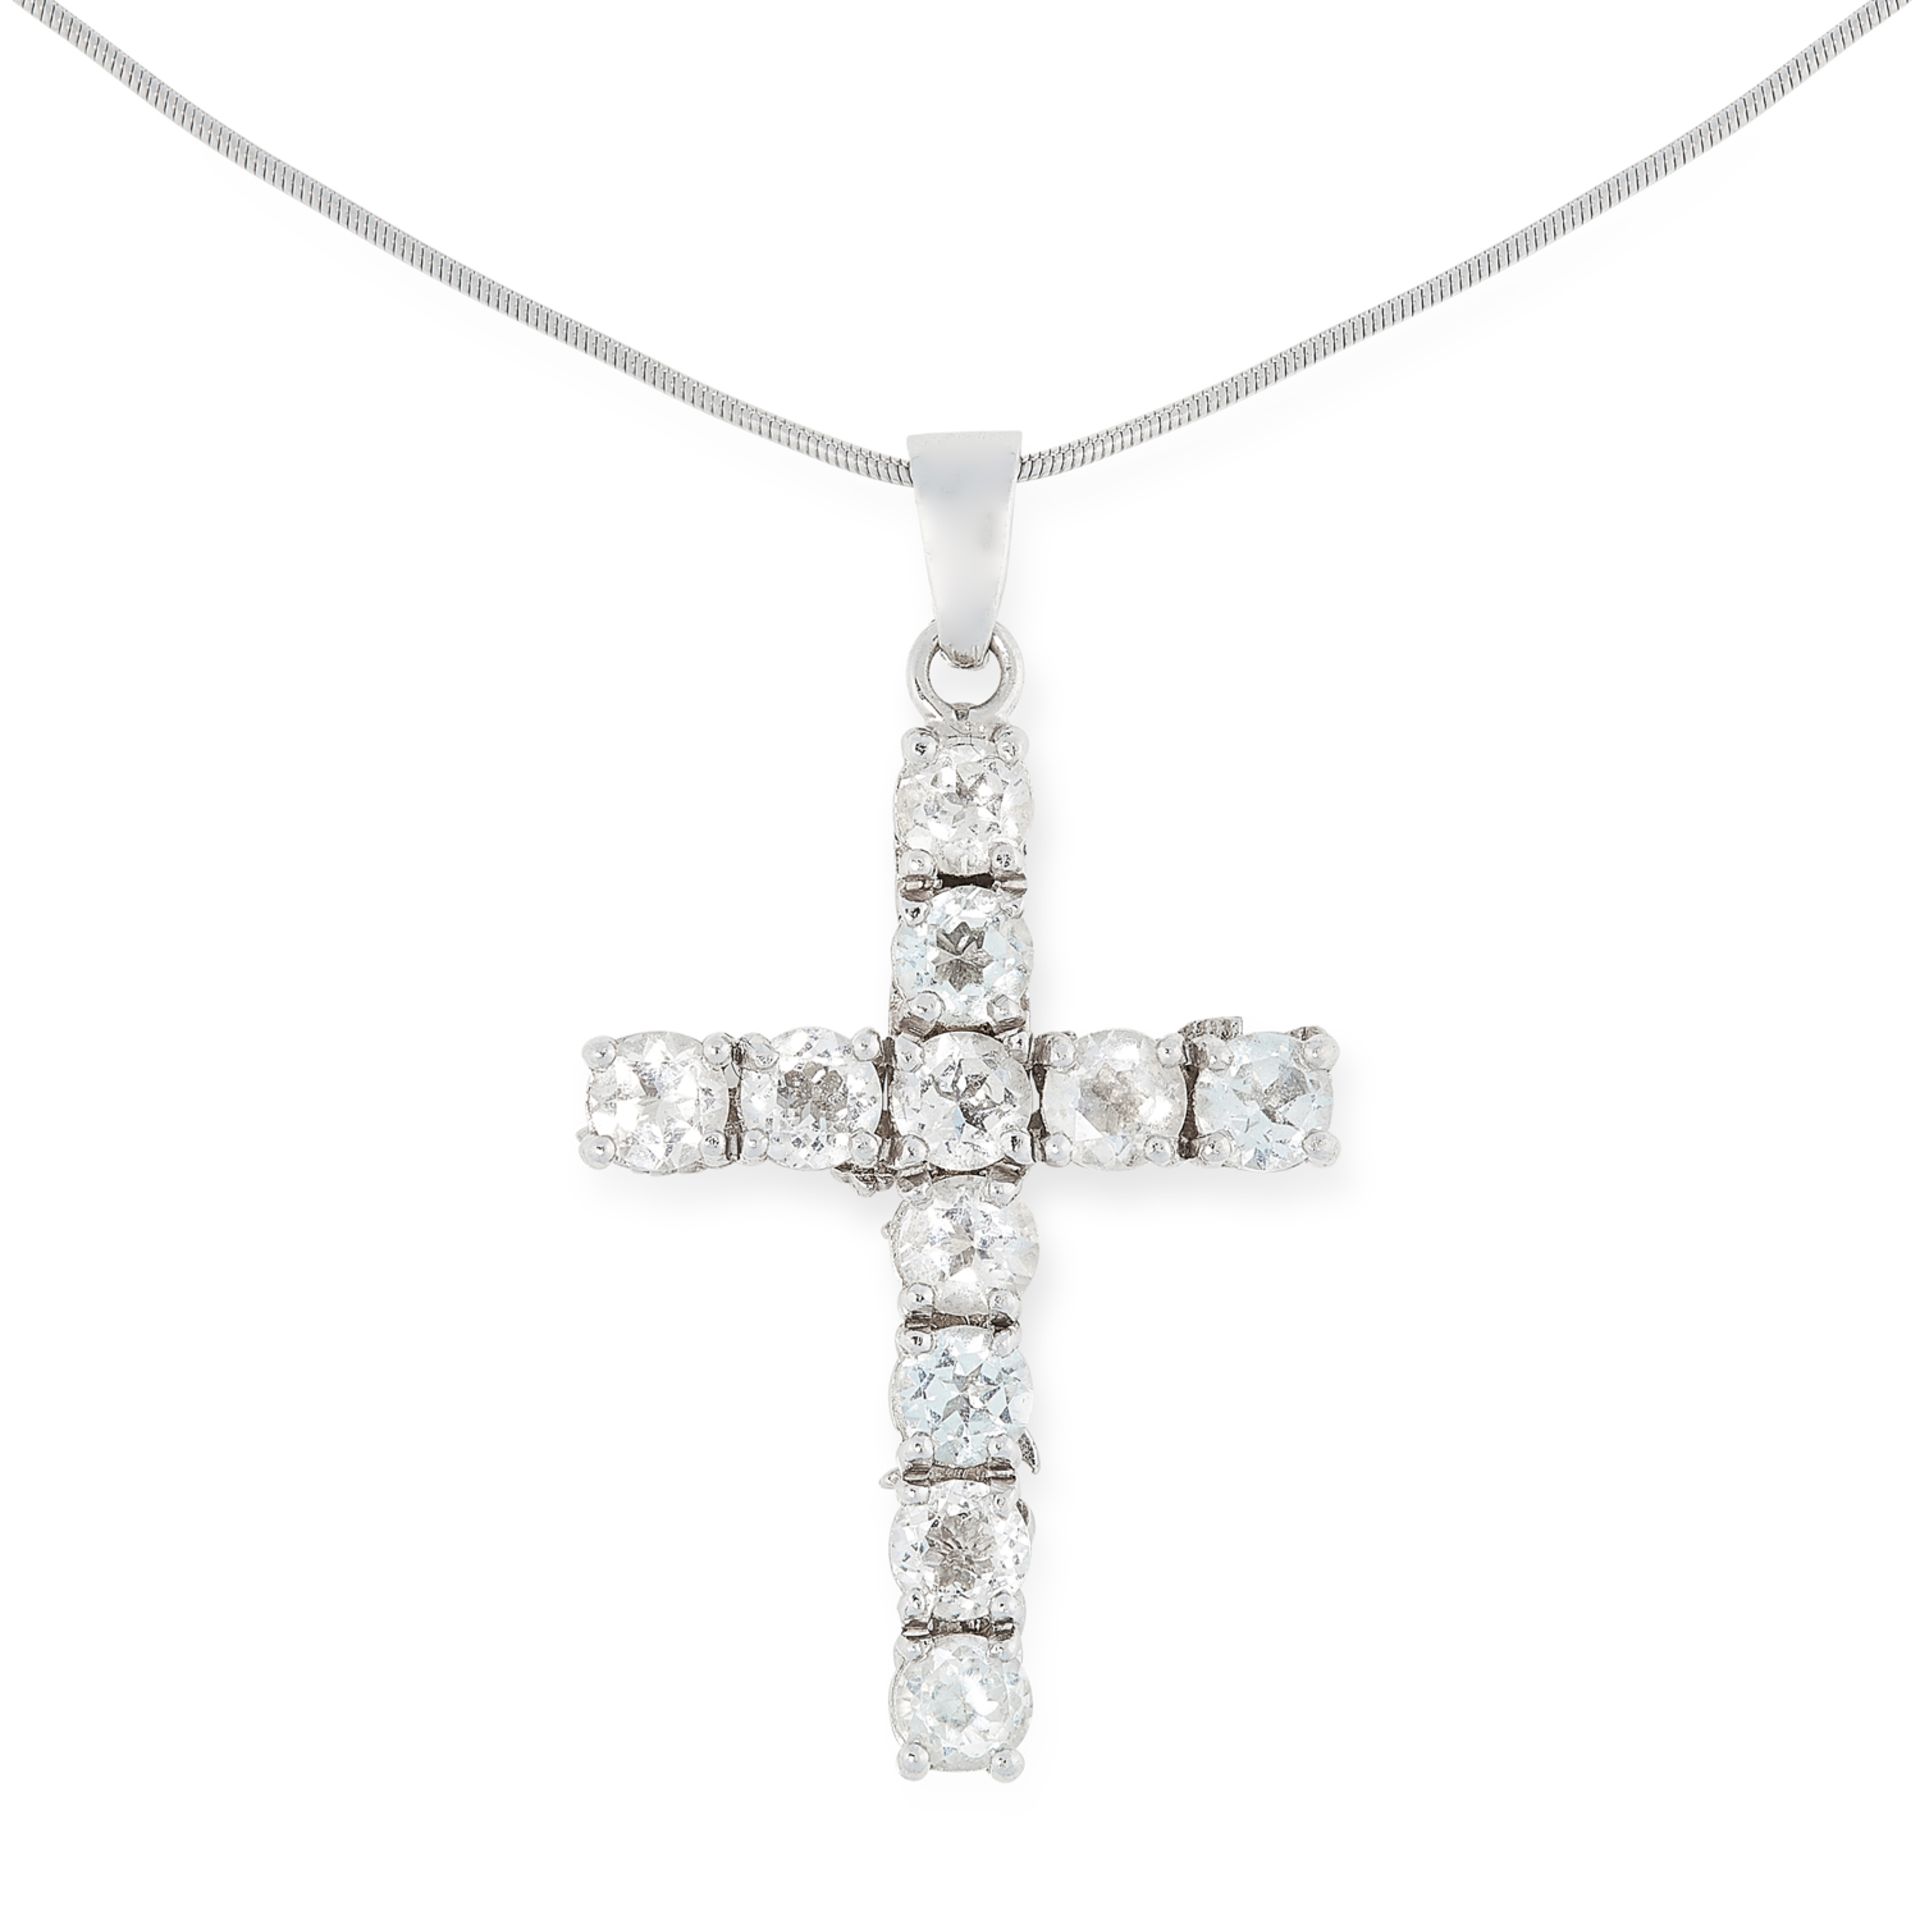 A WHITE TOPAZ CROSS PENDANT AND CHAIN in sterling silver, set with round cut white topaz in cross